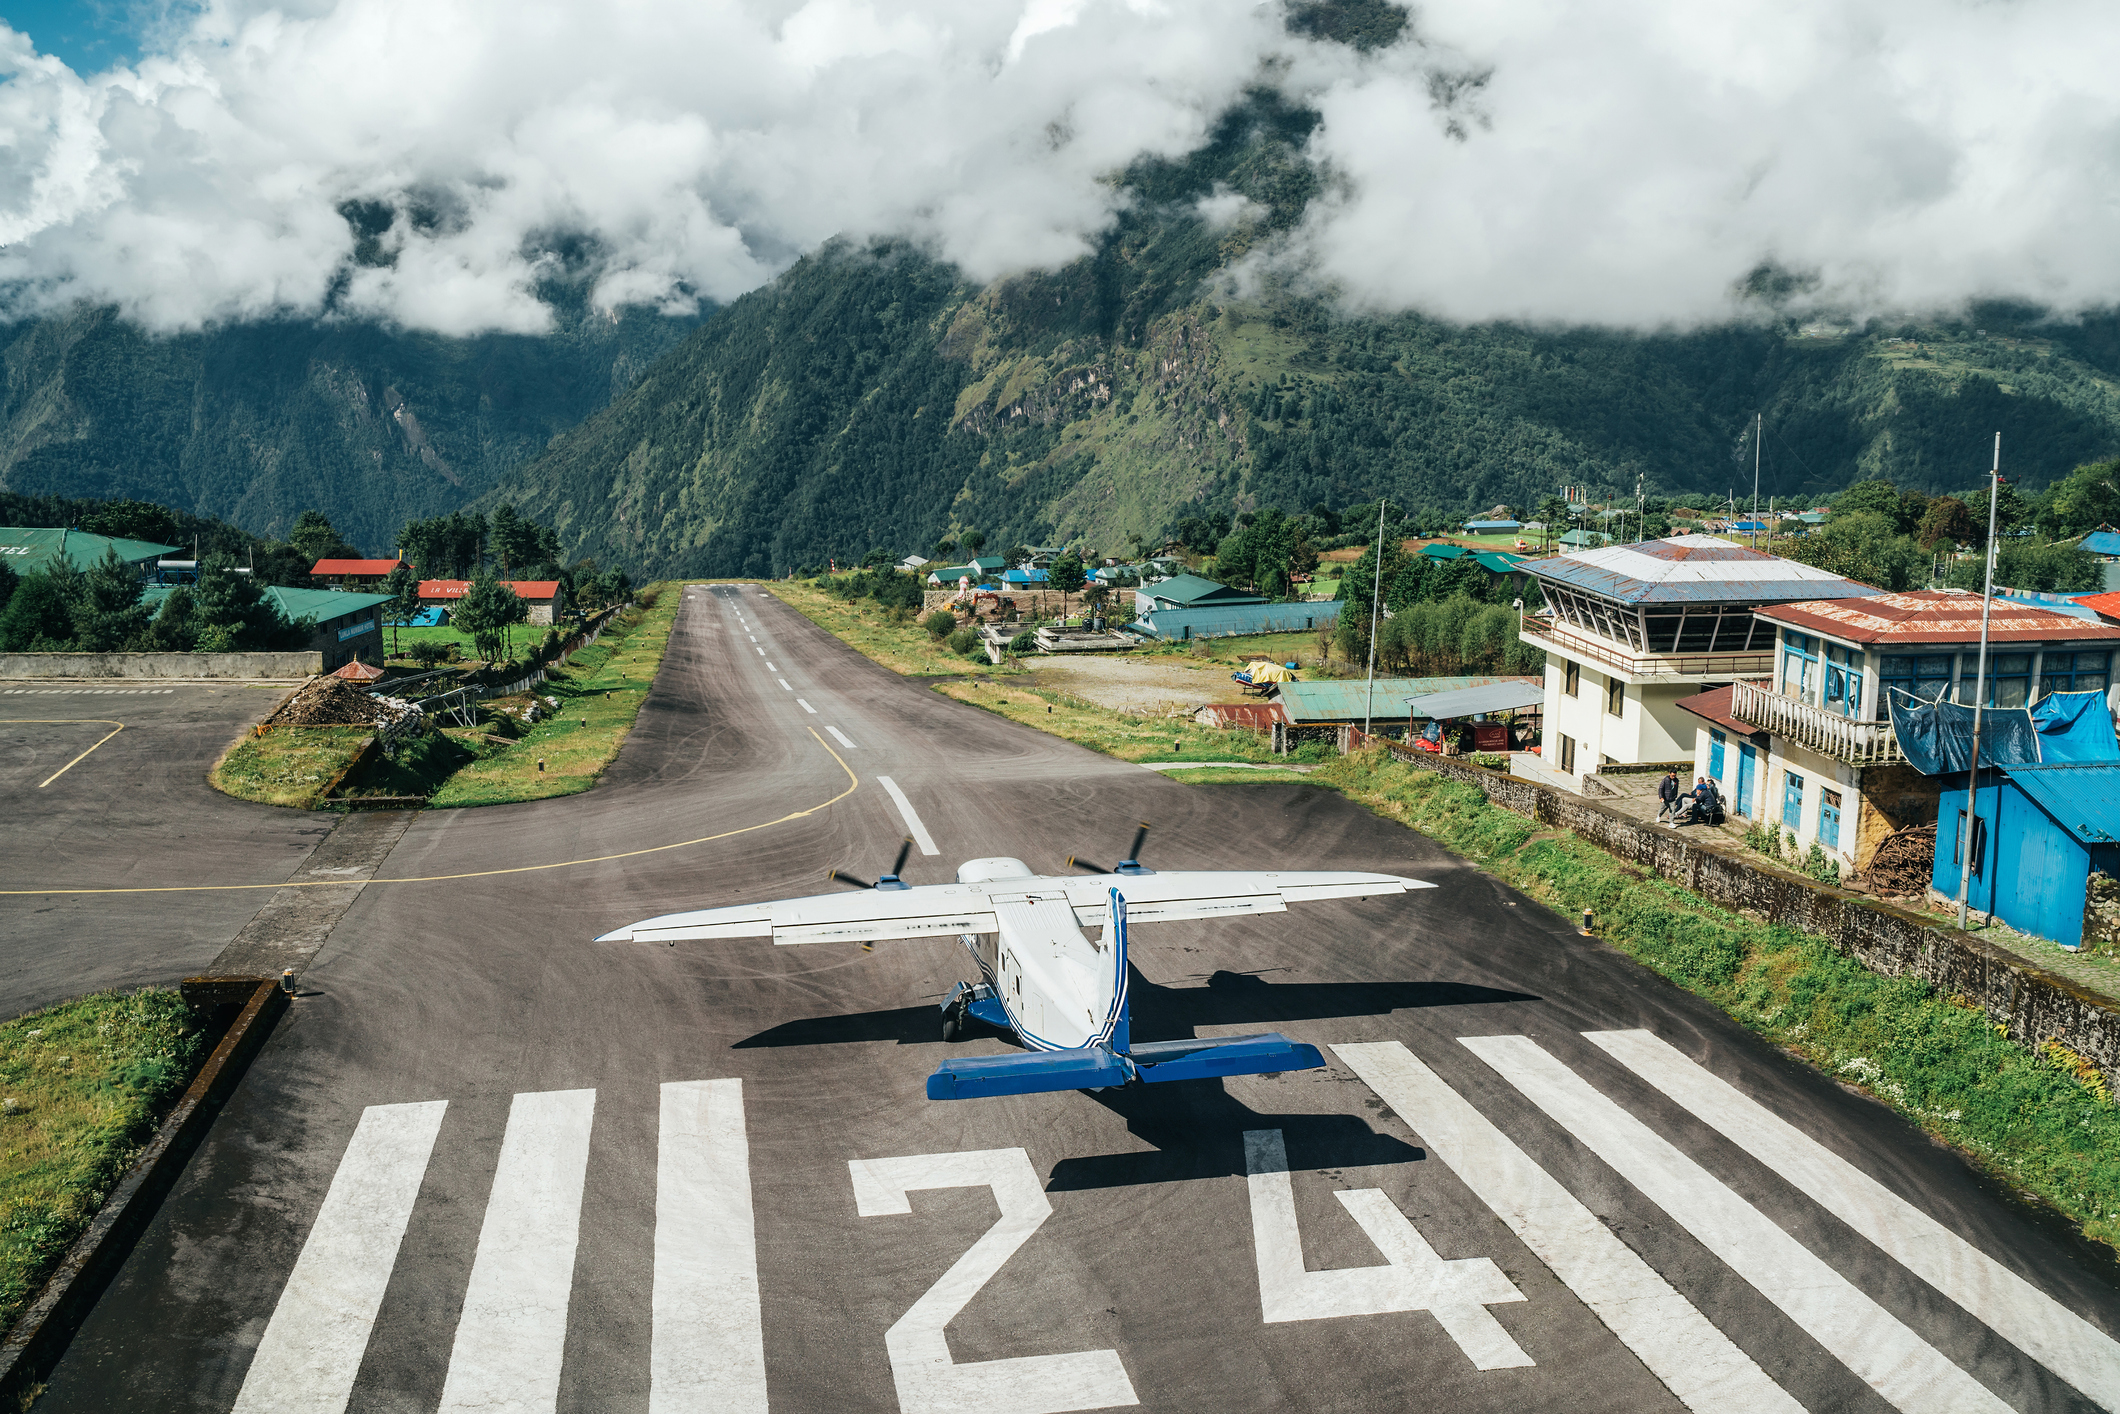 The runway in Lukla with sunshine but also some low-hanging clouds, a propeller plane is just starting its takeoff.